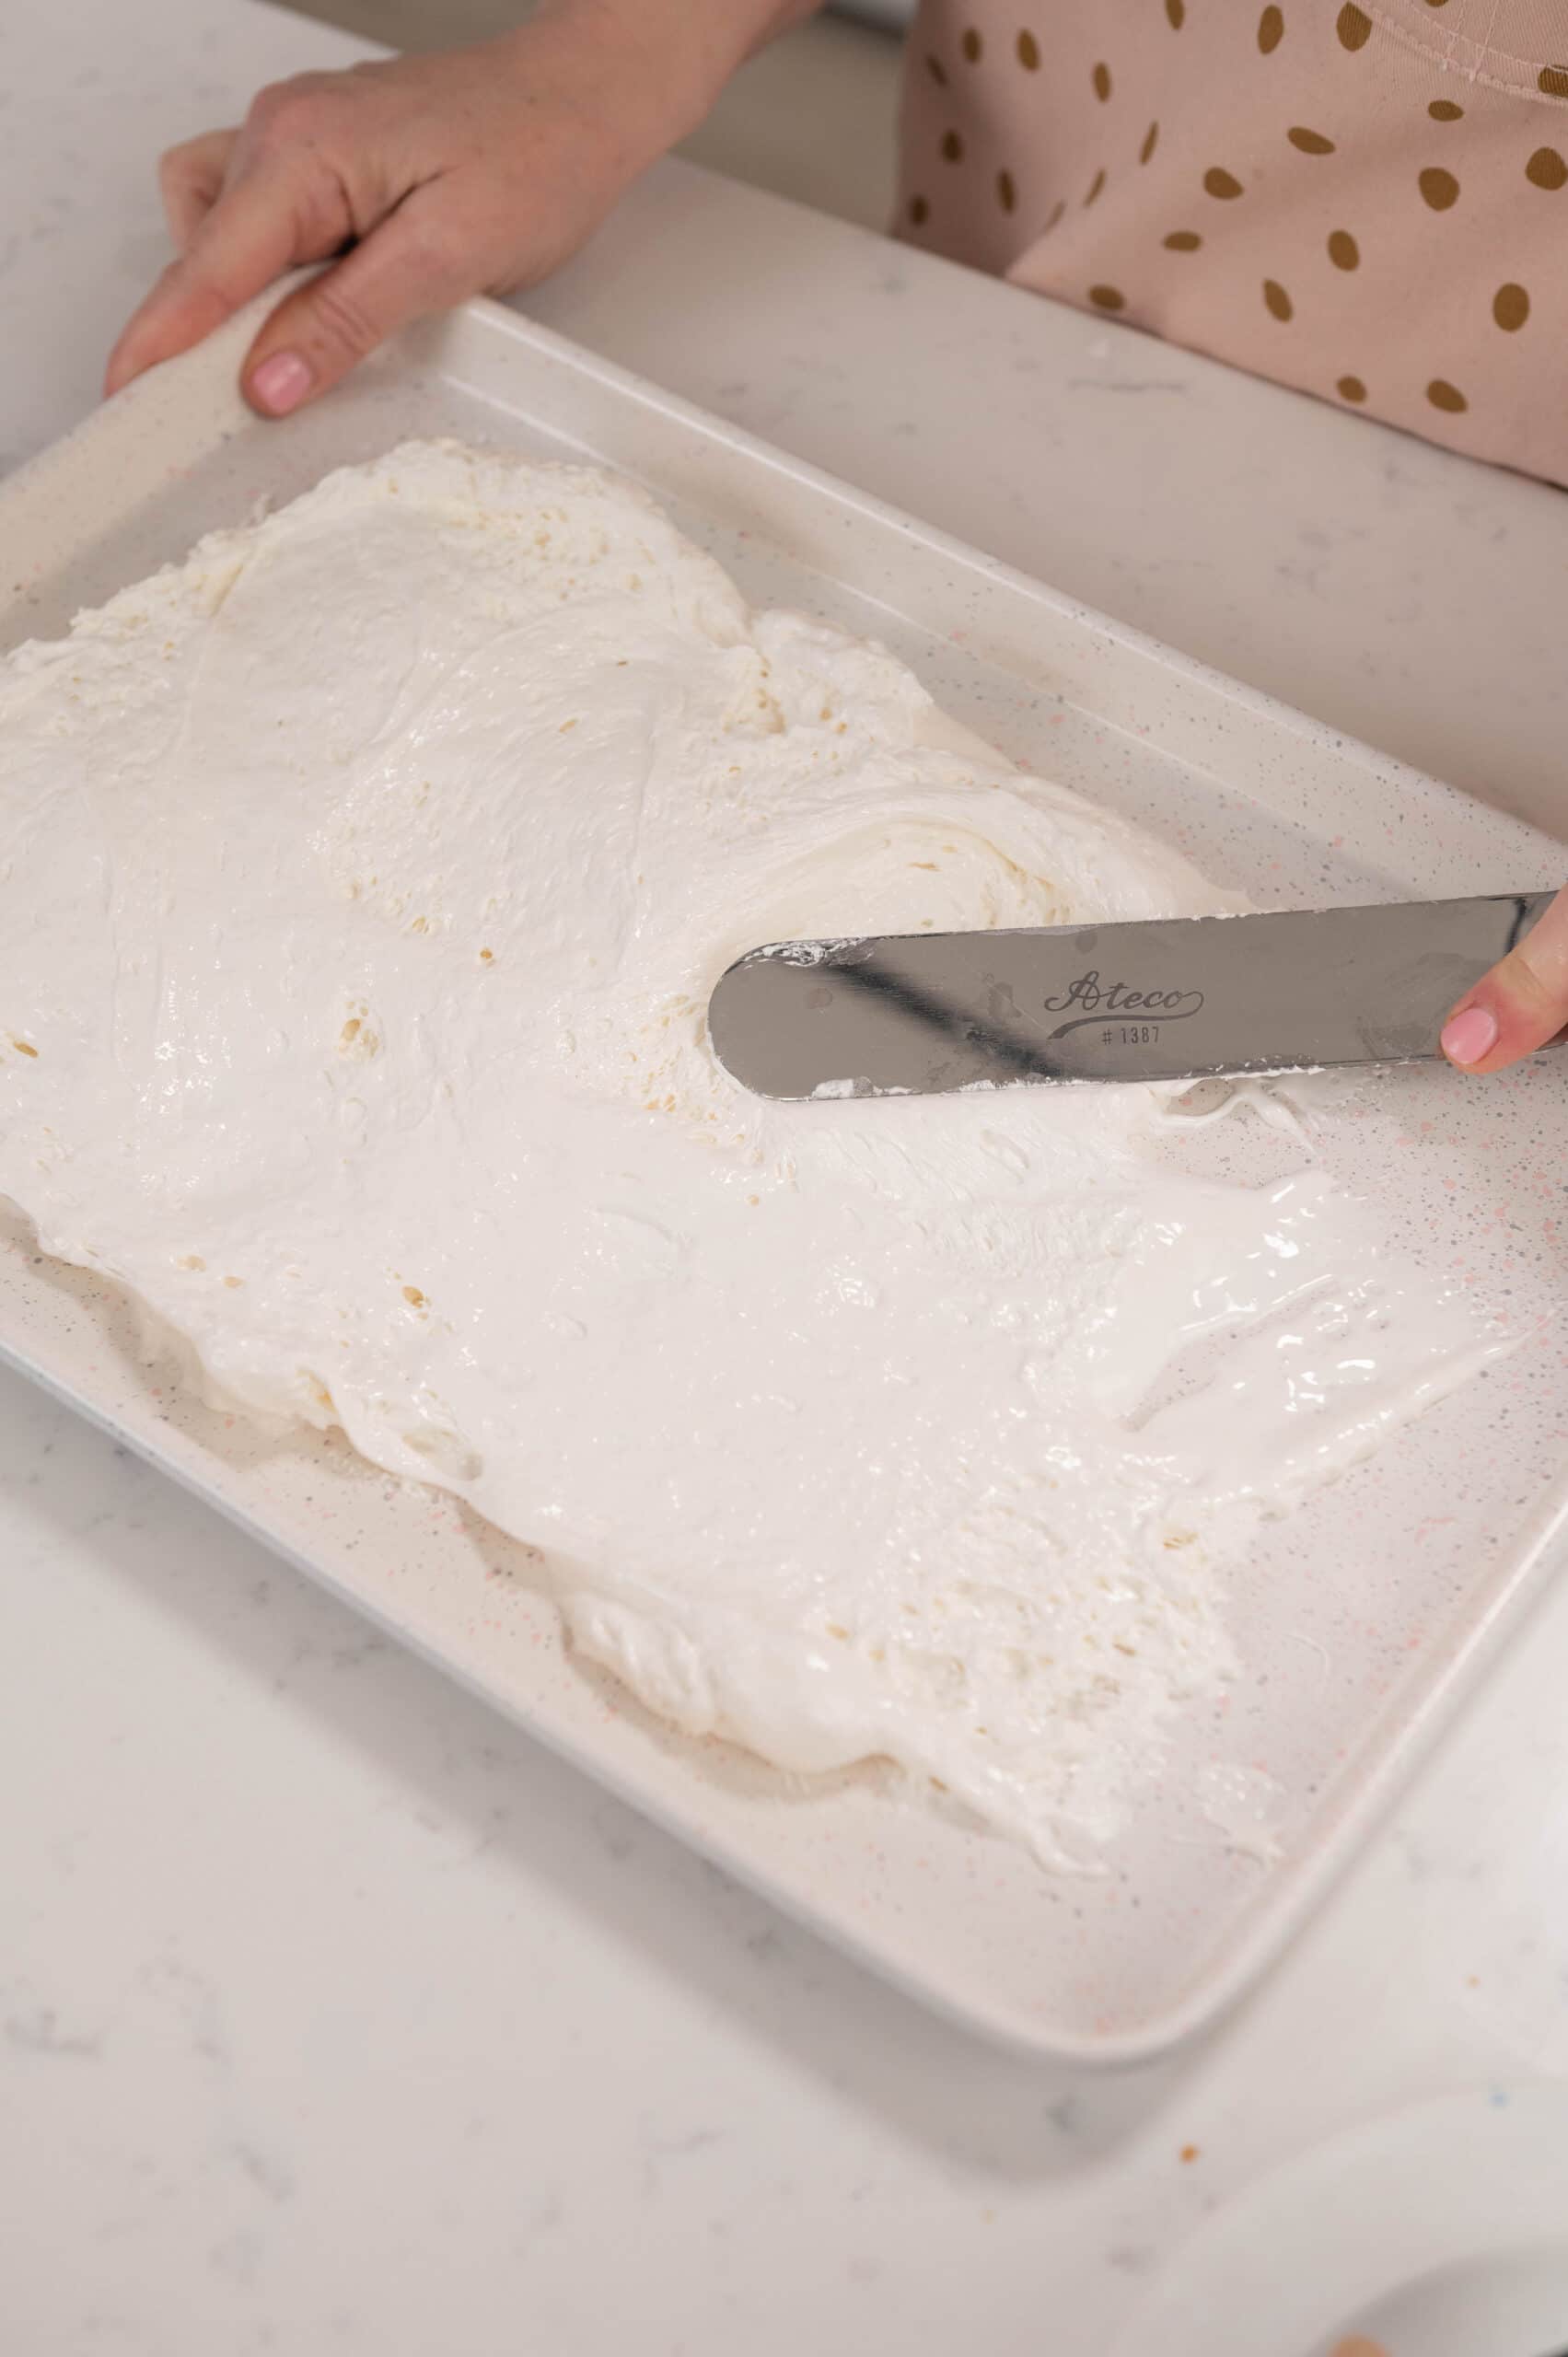 Hand using spatula to spread marshmallow fluff on to sheet pan.